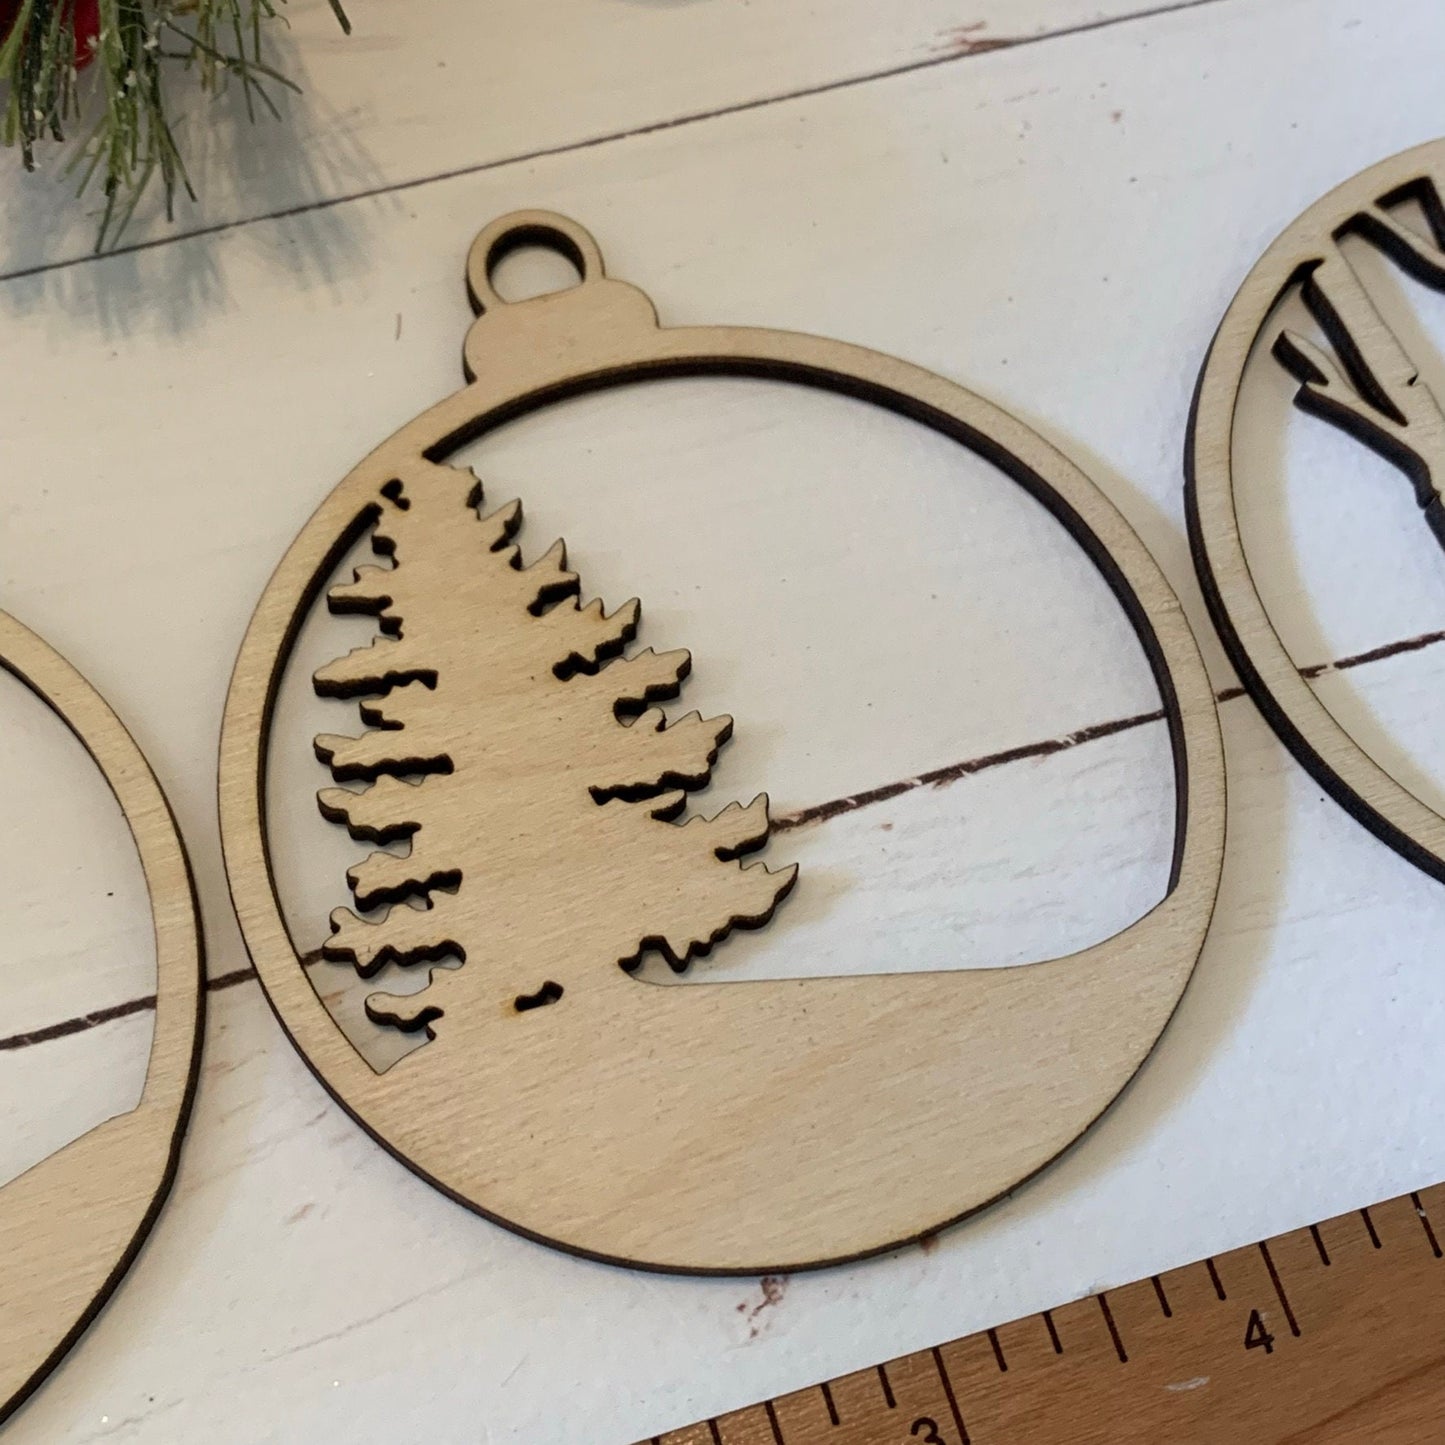 Laser Cut Wood Layered Ornament - Reindeer and Woodland Scene, Pine Trees, Birch Trees, Deer - Unfinished Wood - Personalization with Name